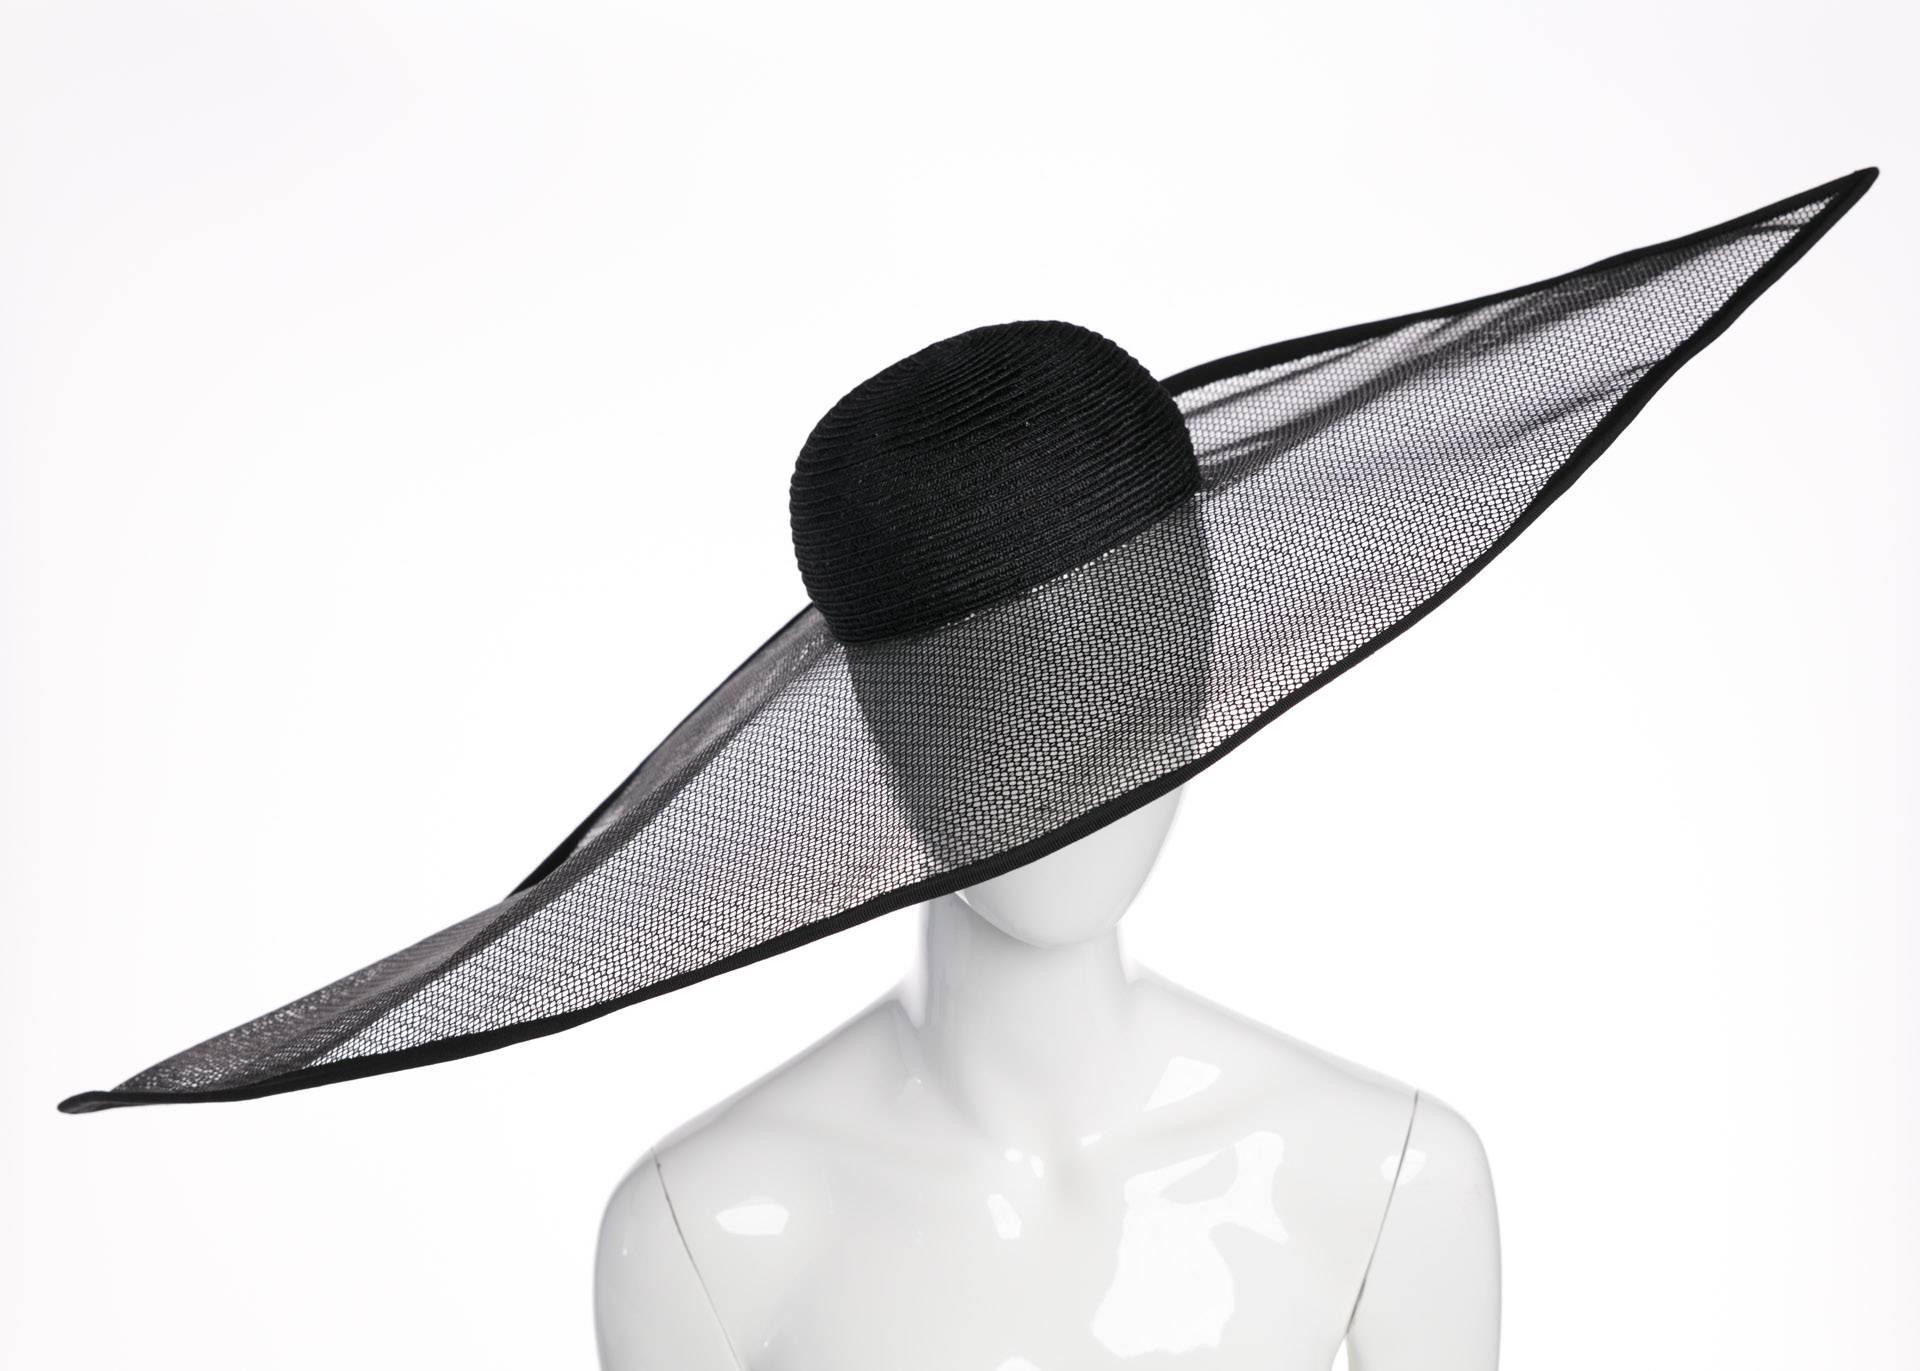 This hat cannot help but evoke the vivid millinery displayed during royal events in Great Britain. Renowned Italian designer Giorgio Armani brings the same sophistication to this hat that he brings to his clothing design. Featuring dyed black sisal,